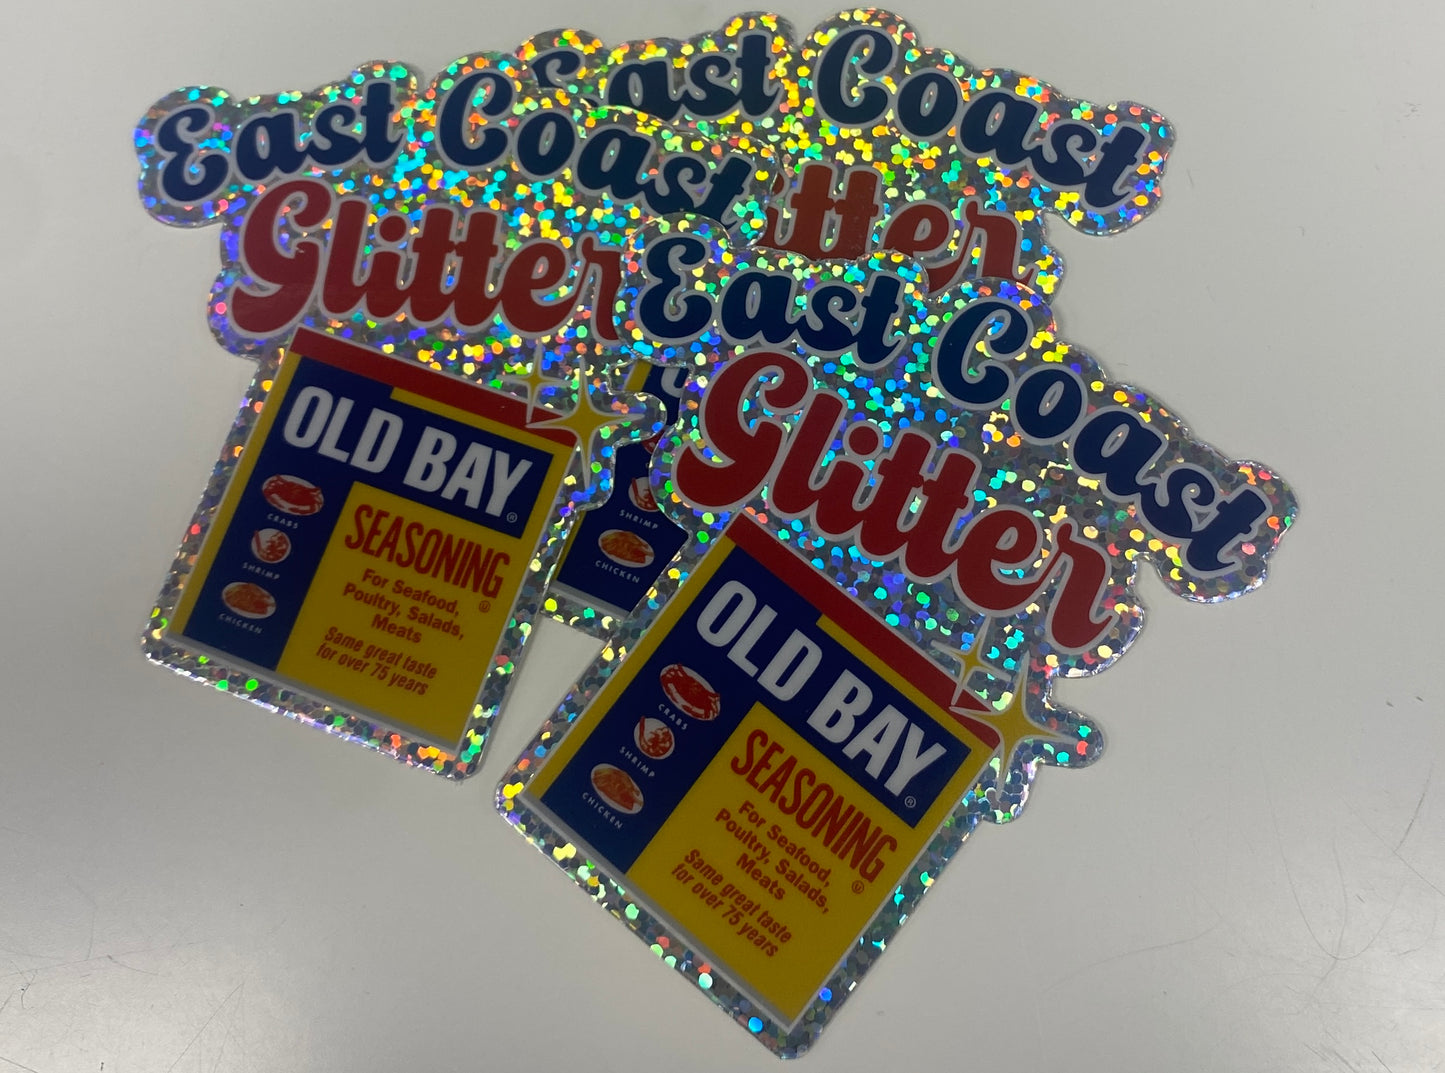 OLD BAY East Coast Glitter / Sticker - Route One Apparel